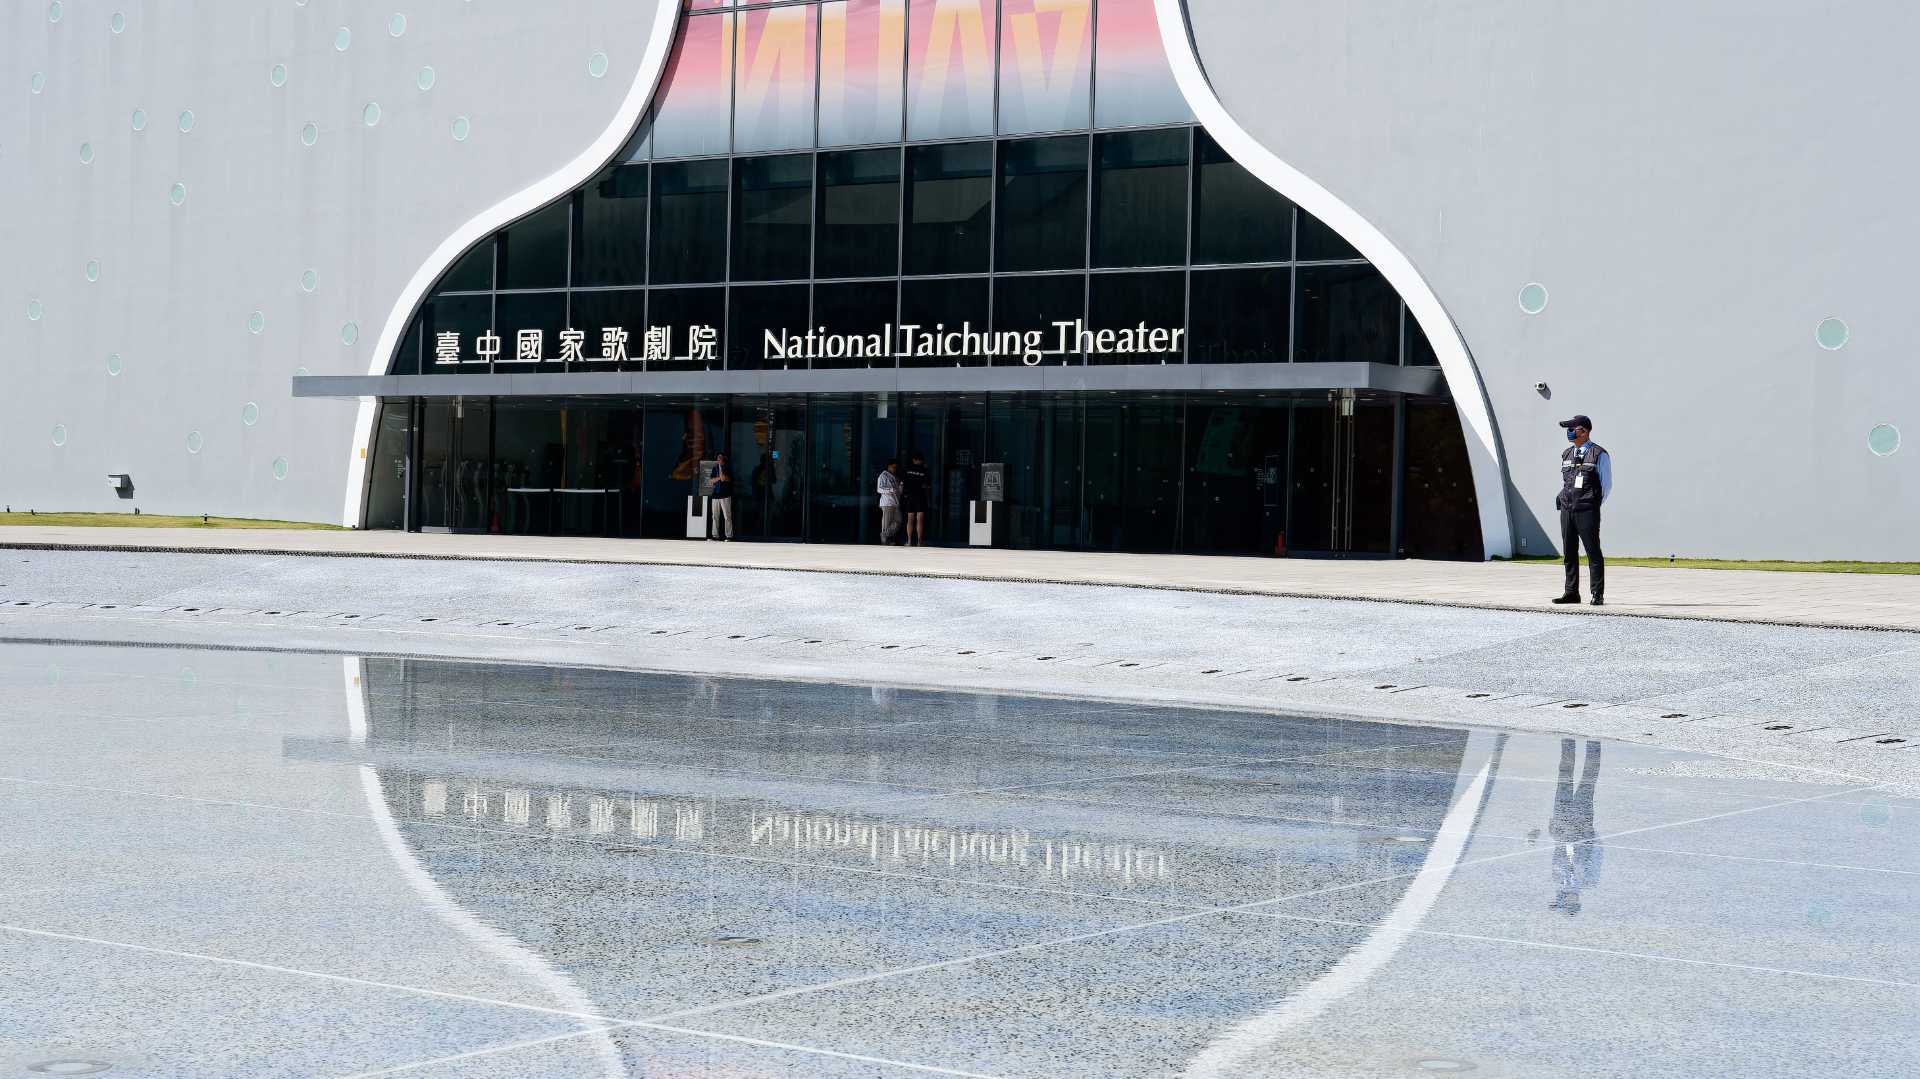 A security guard at the entrance to National Taichung Theater, reflected in a shallow pool of water.